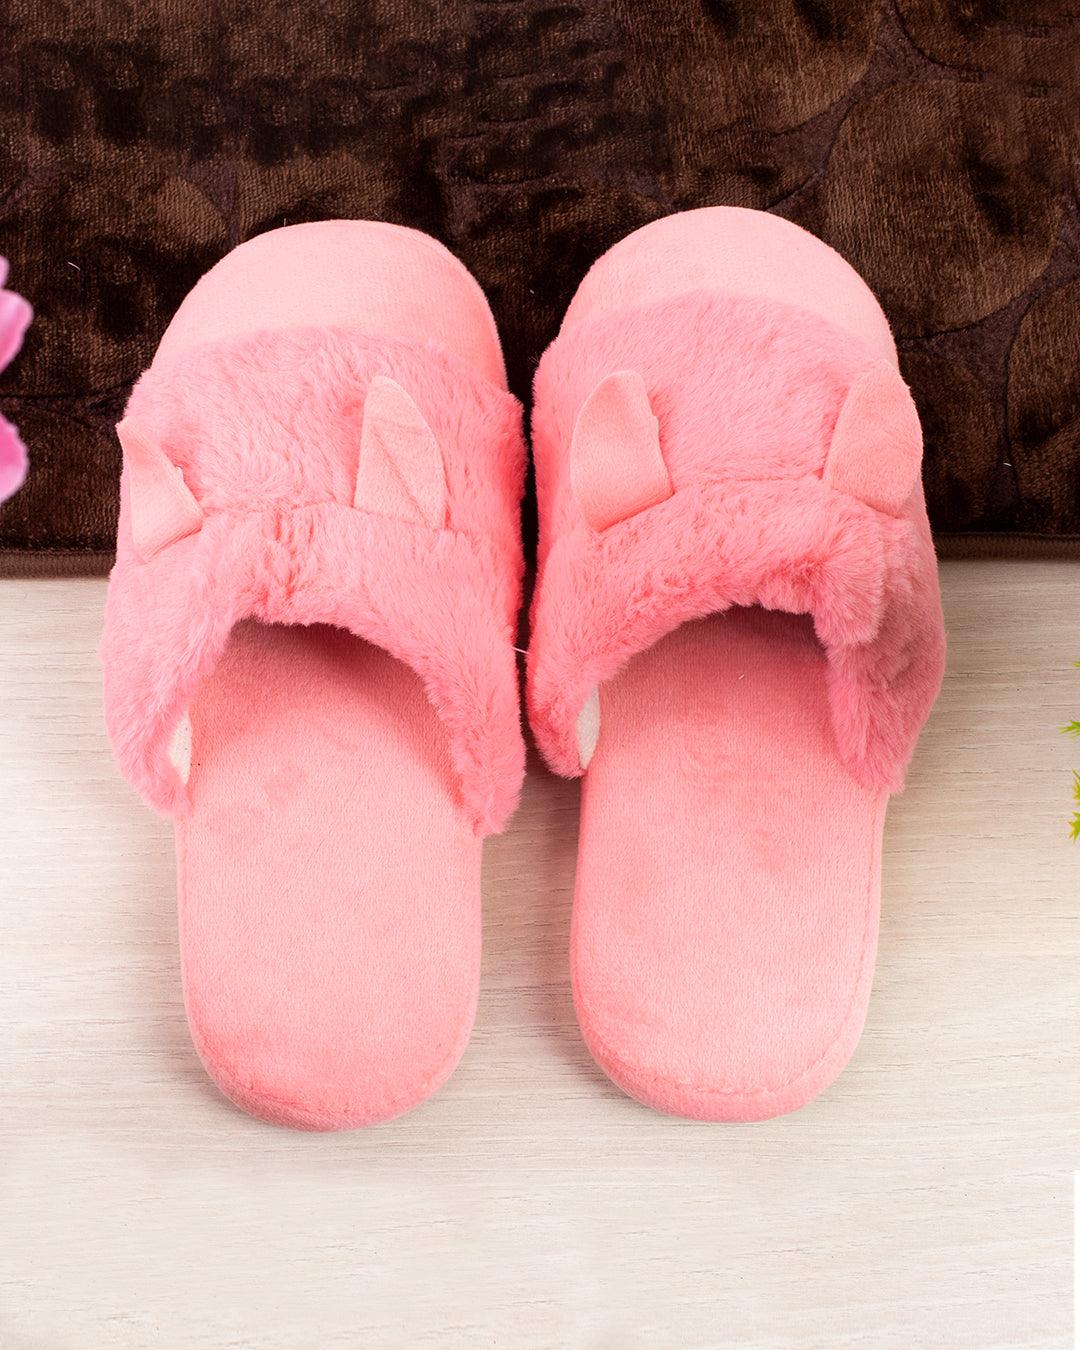 Donati Bedroom Fluffy Slippers, Pink, Polyester - MARKET 99